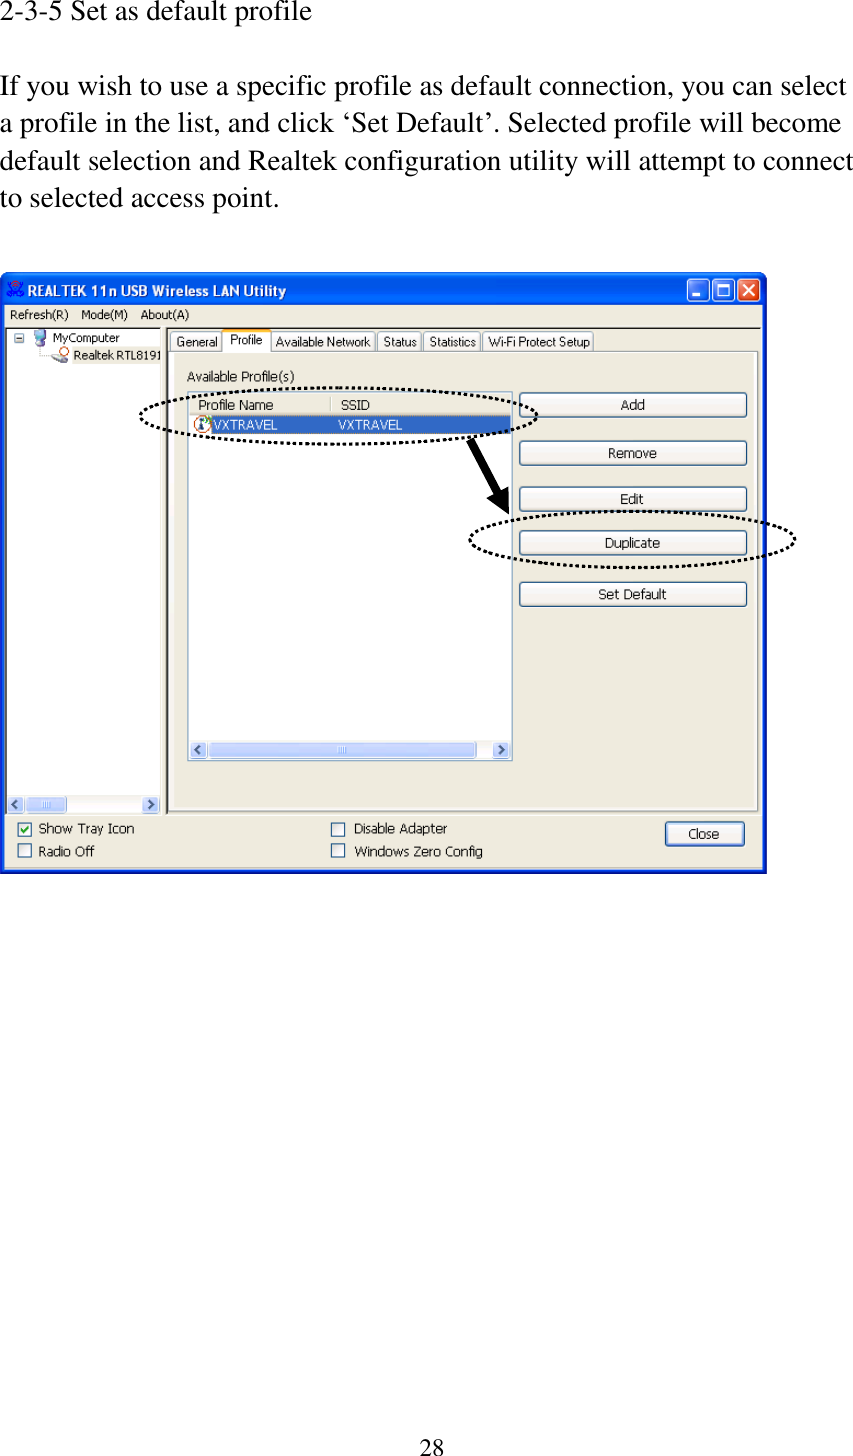 28  2-3-5 Set as default profile  If you wish to use a specific profile as default connection, you can select a profile in the list, and click ‘Set Default’. Selected profile will become default selection and Realtek configuration utility will attempt to connect to selected access point.              